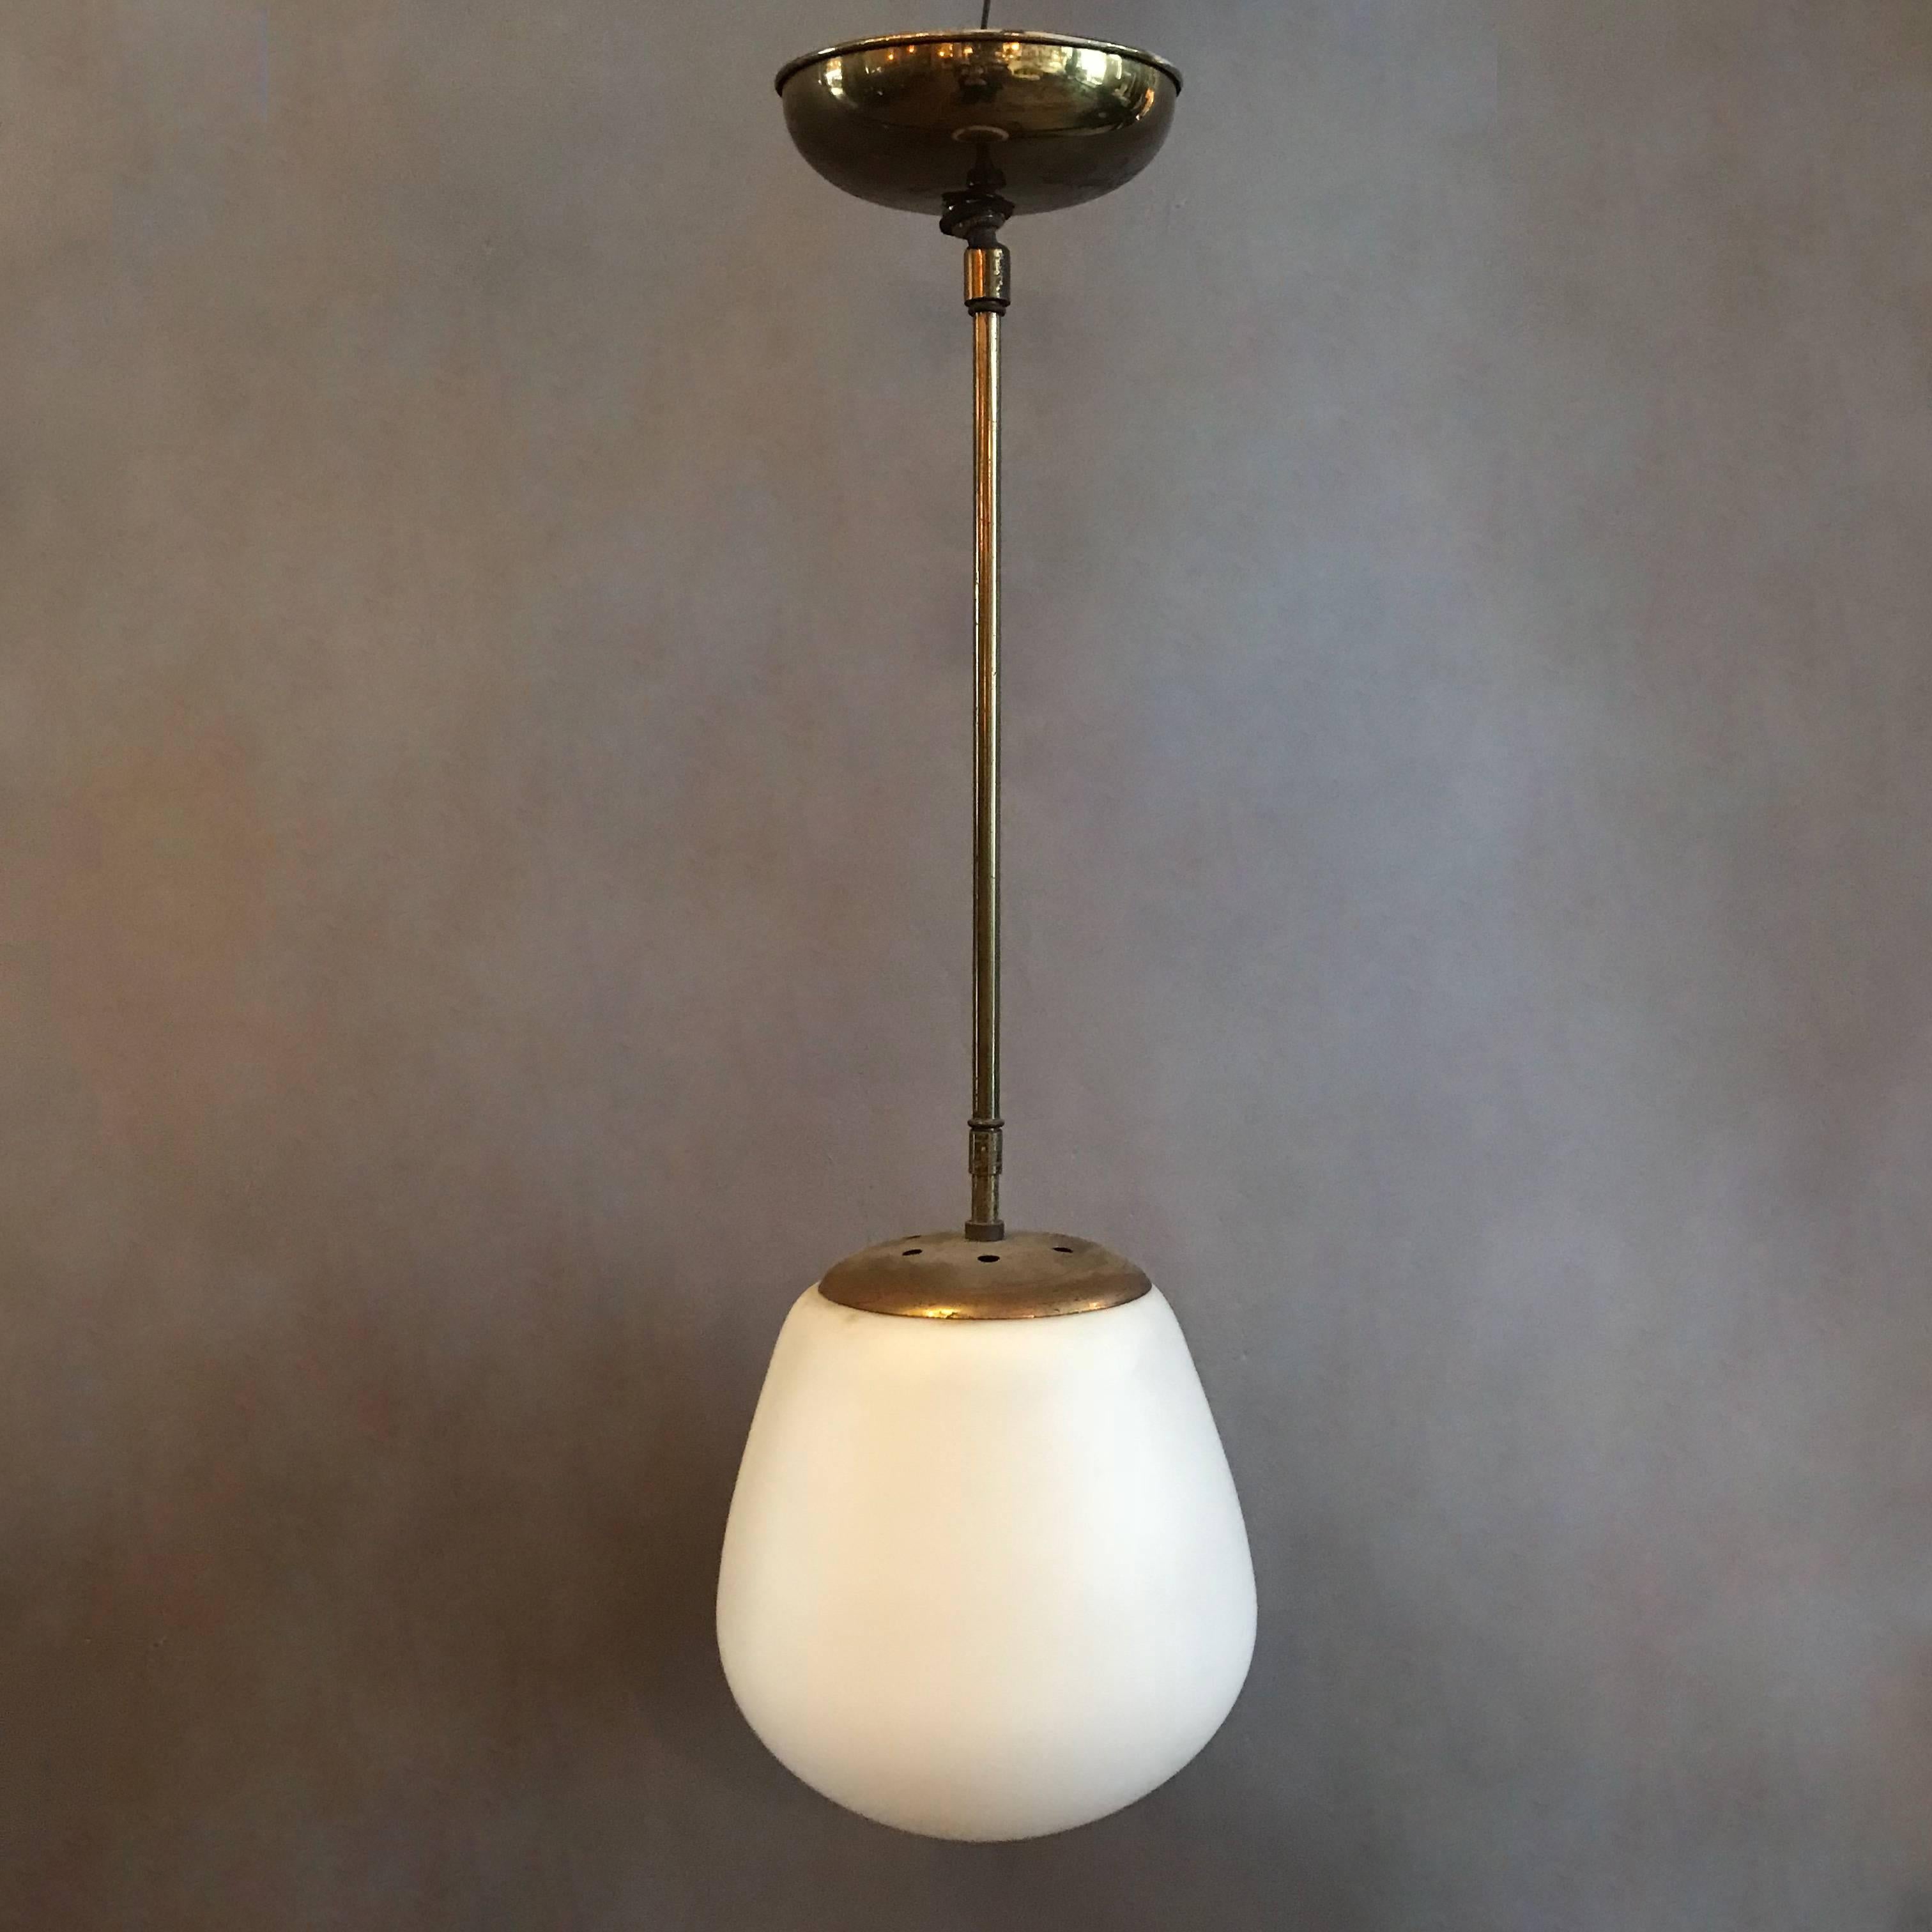 Danish Modern pendant light features a frosted white, size 8 in x 8 in oblong shade with brass pole and canopy.